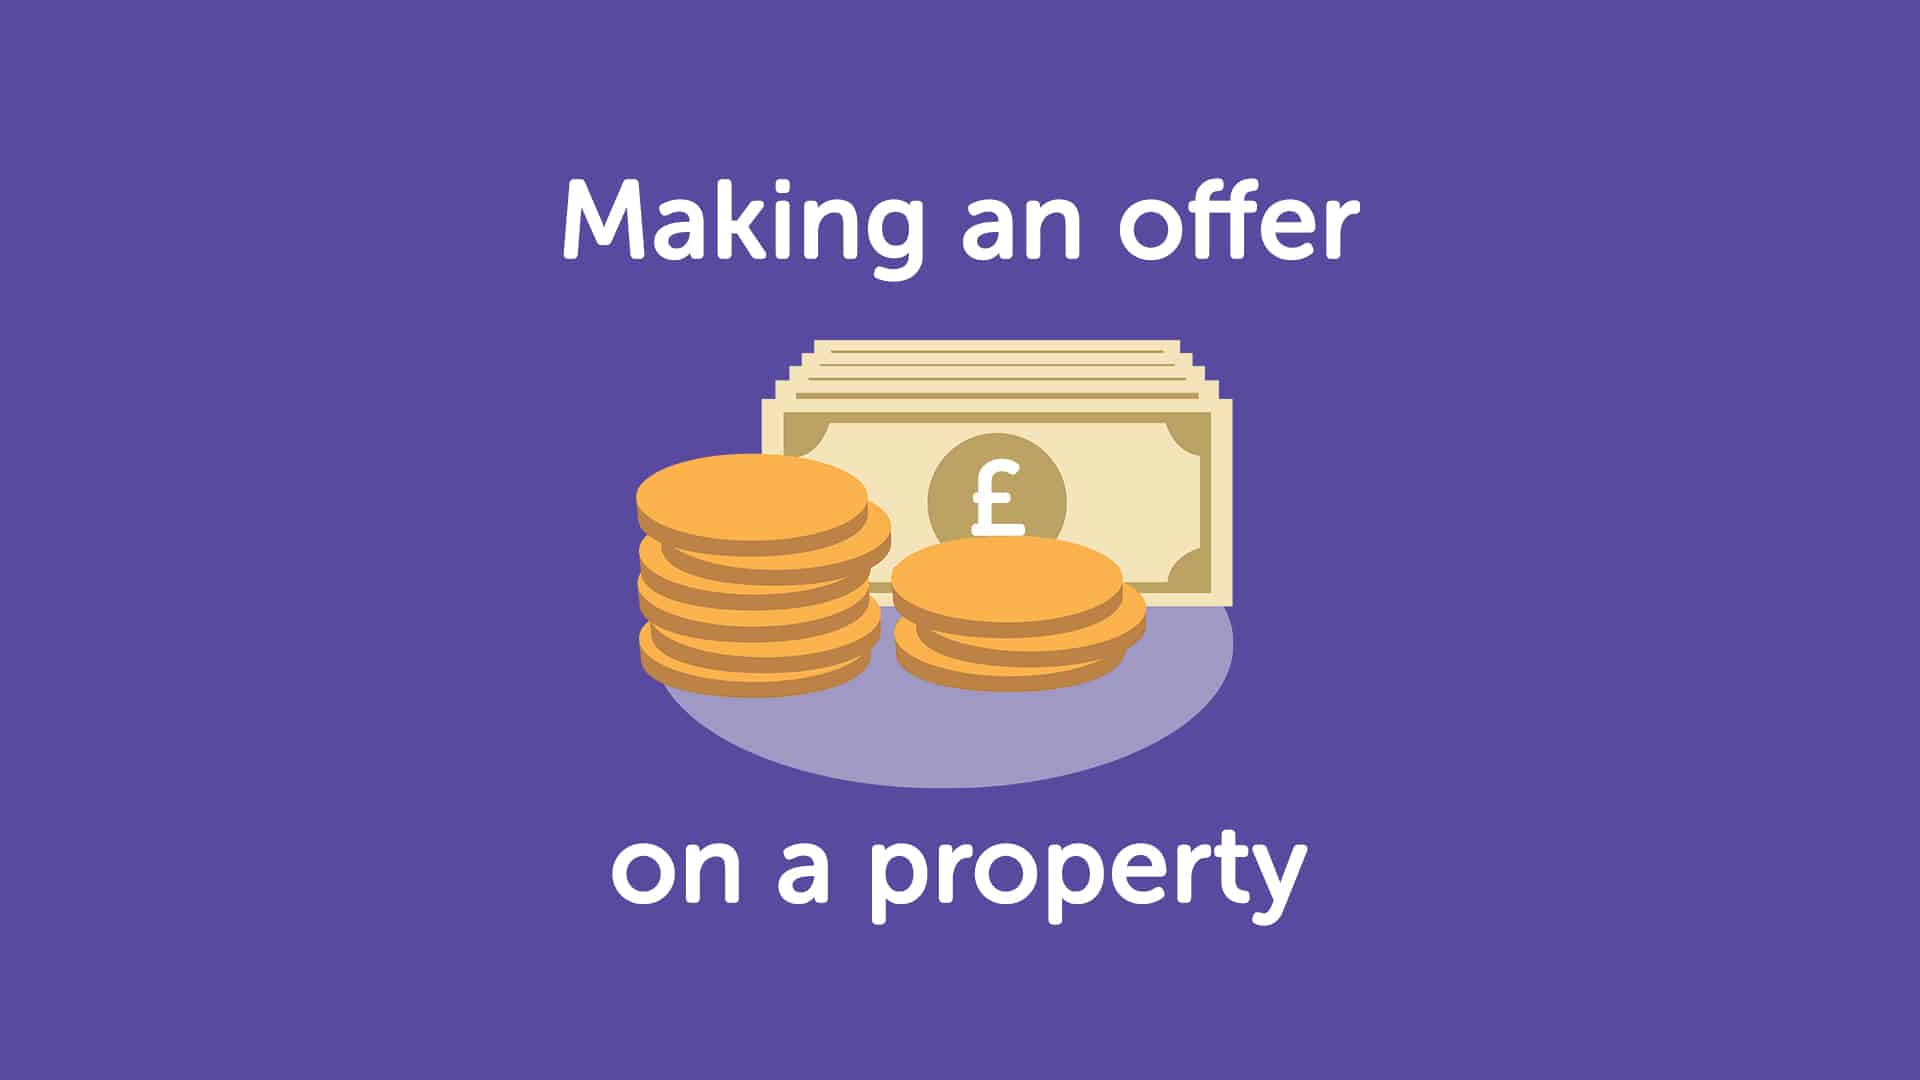 How to Make an Offer on a Property in Derby?